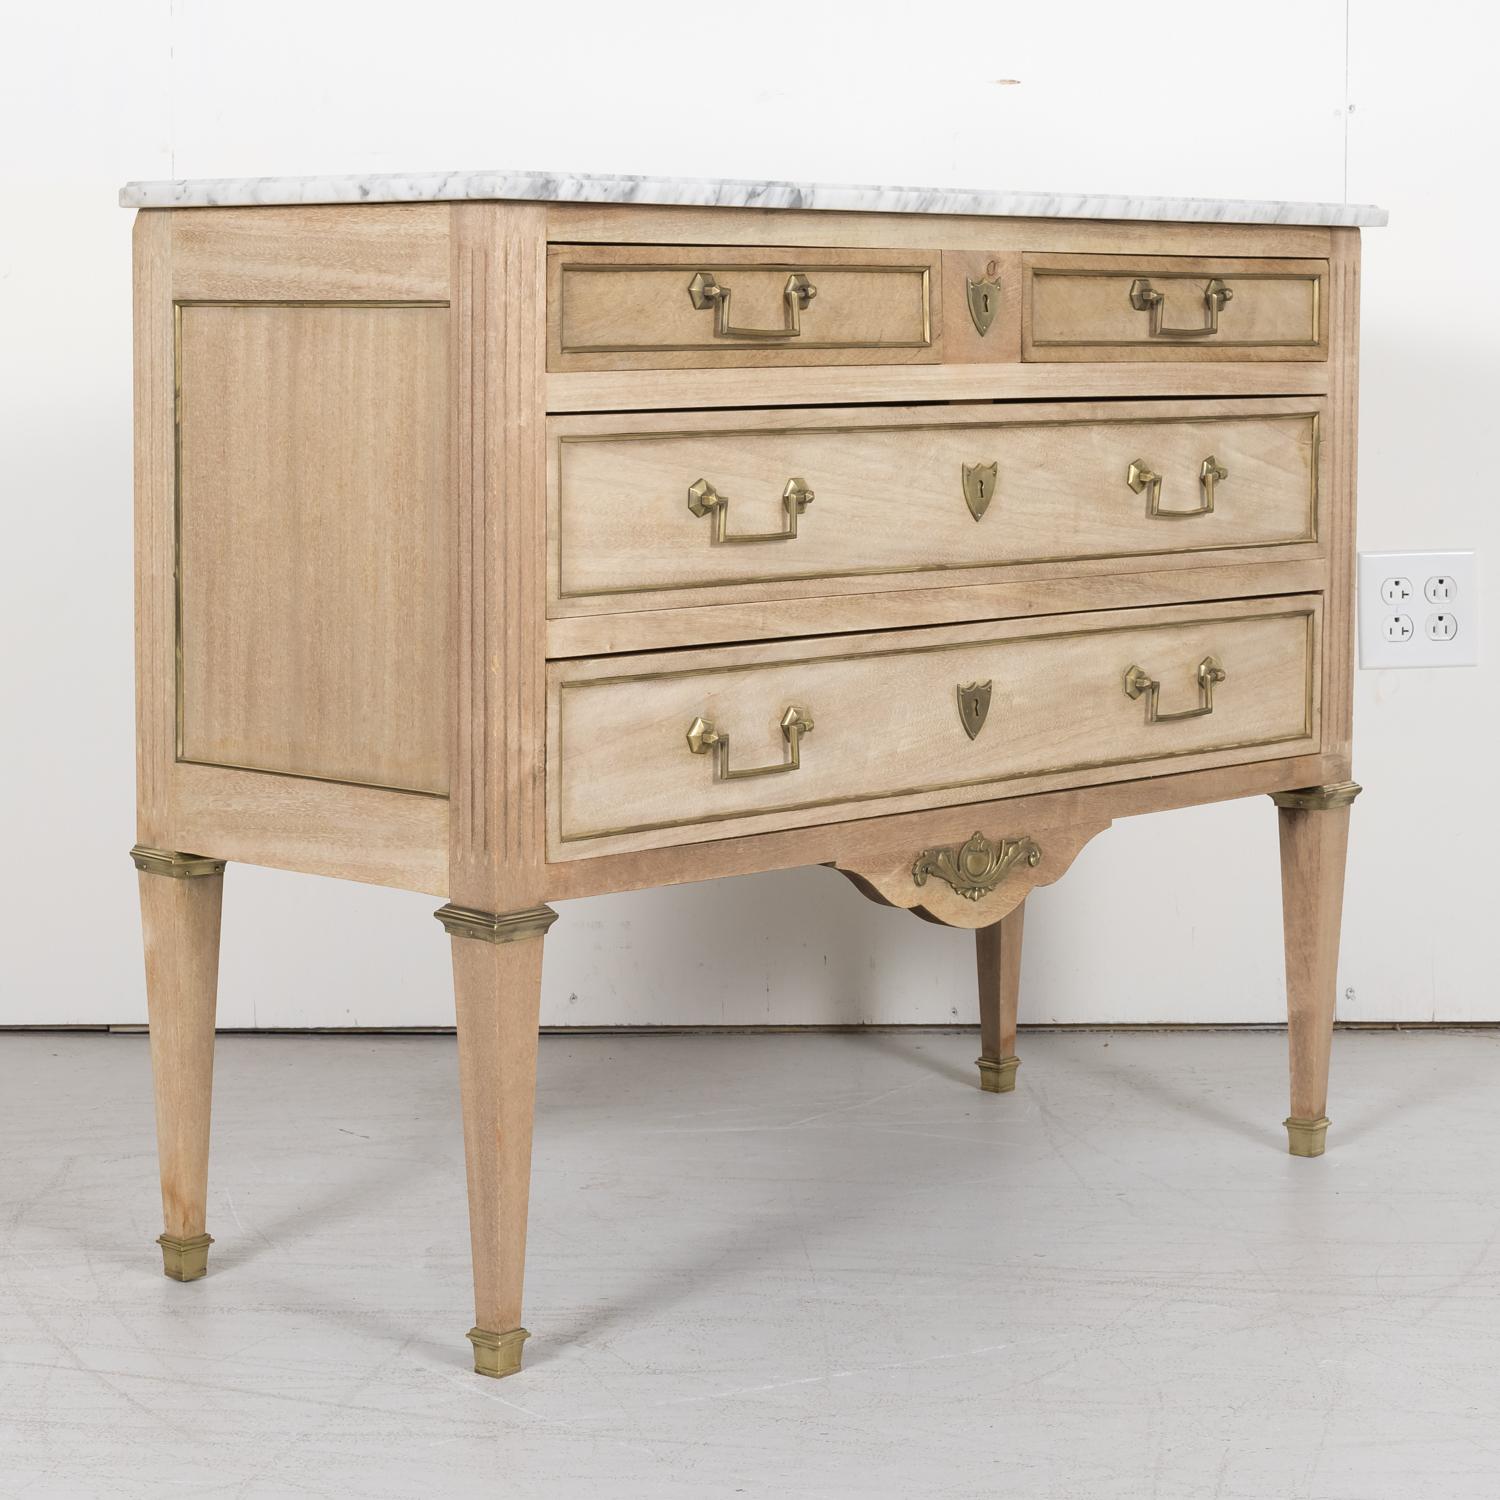 An early 20th century French Louis XVI style bleached mahogany four drawer commode handcrafted in Paris, circa 1900, having its original Carrara marble top over two frieze drawers above two long drawers adorned with original brass trim, drop bail